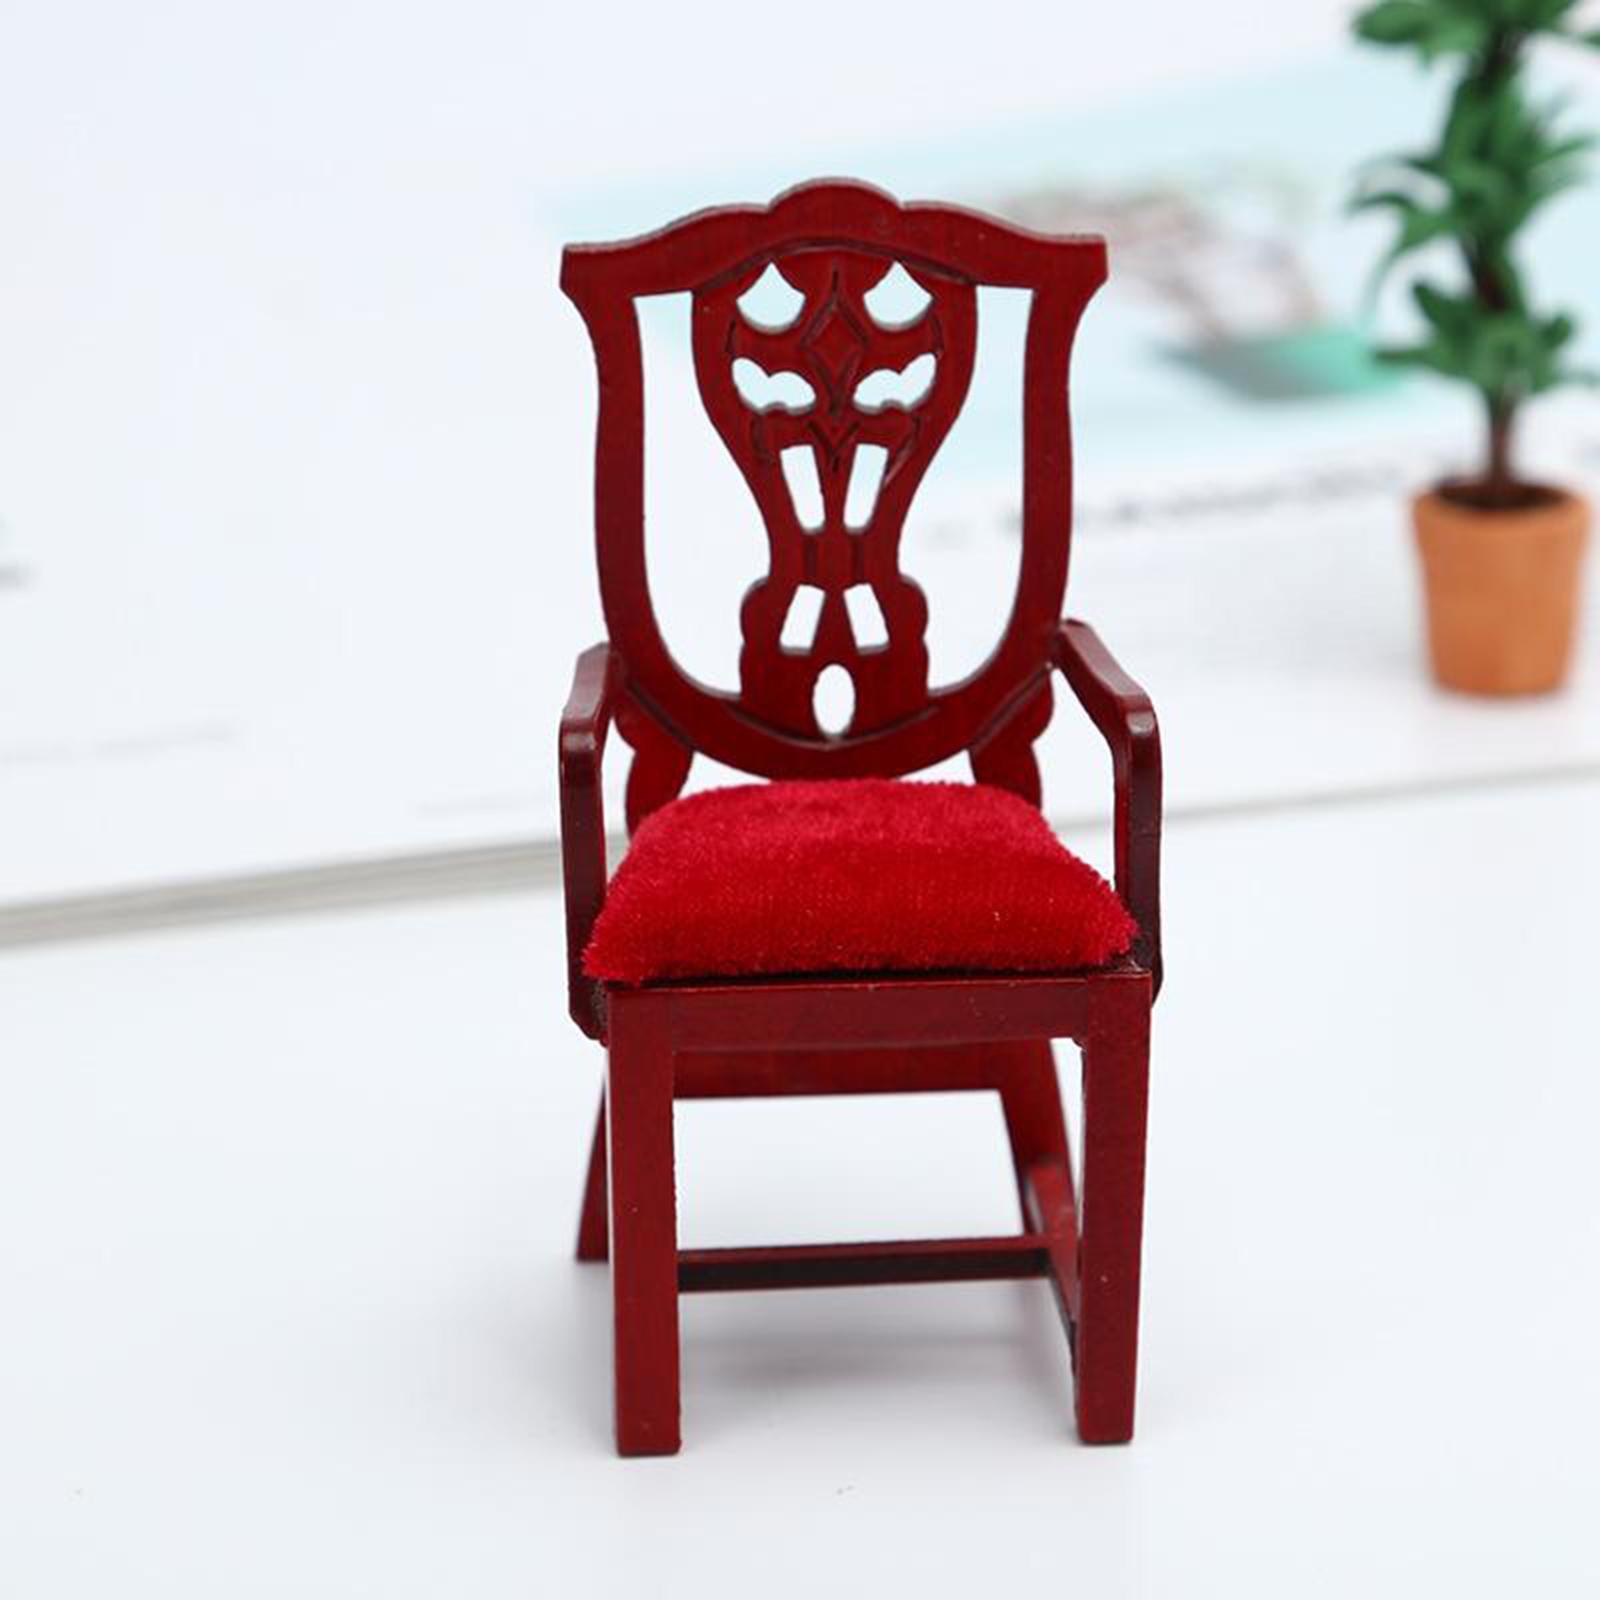 Simulation Small Chair Furniture Model Toys for Doll House Decoration 1:12